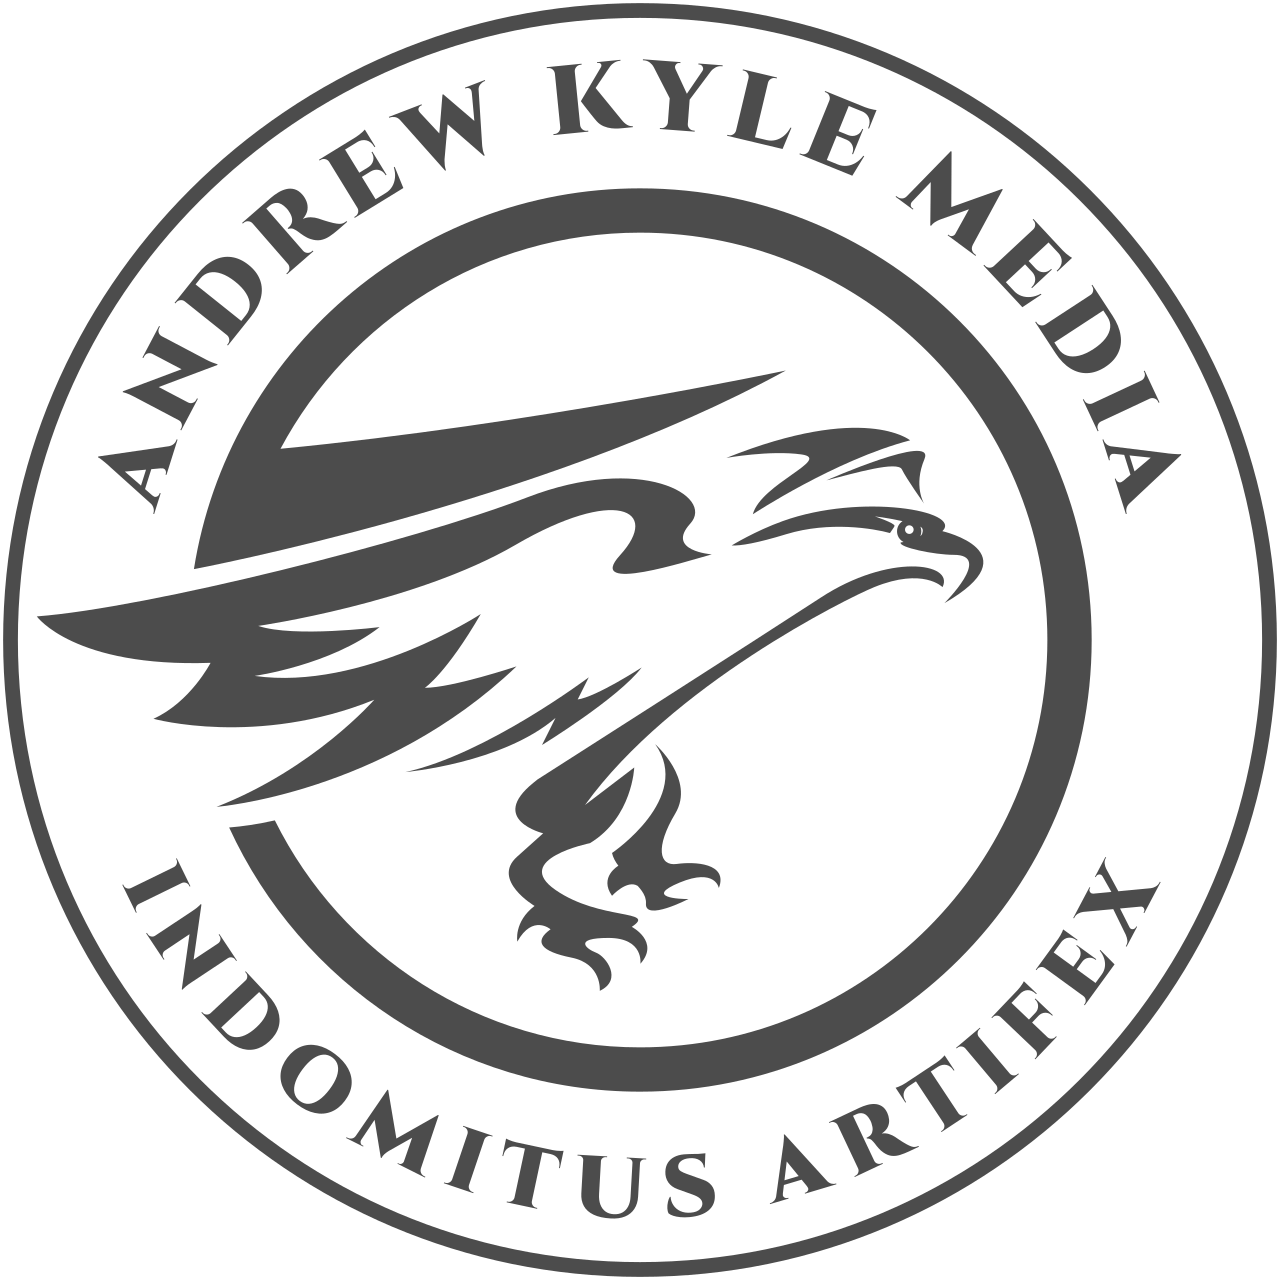 ANDREW KYLE MEDIA's web page